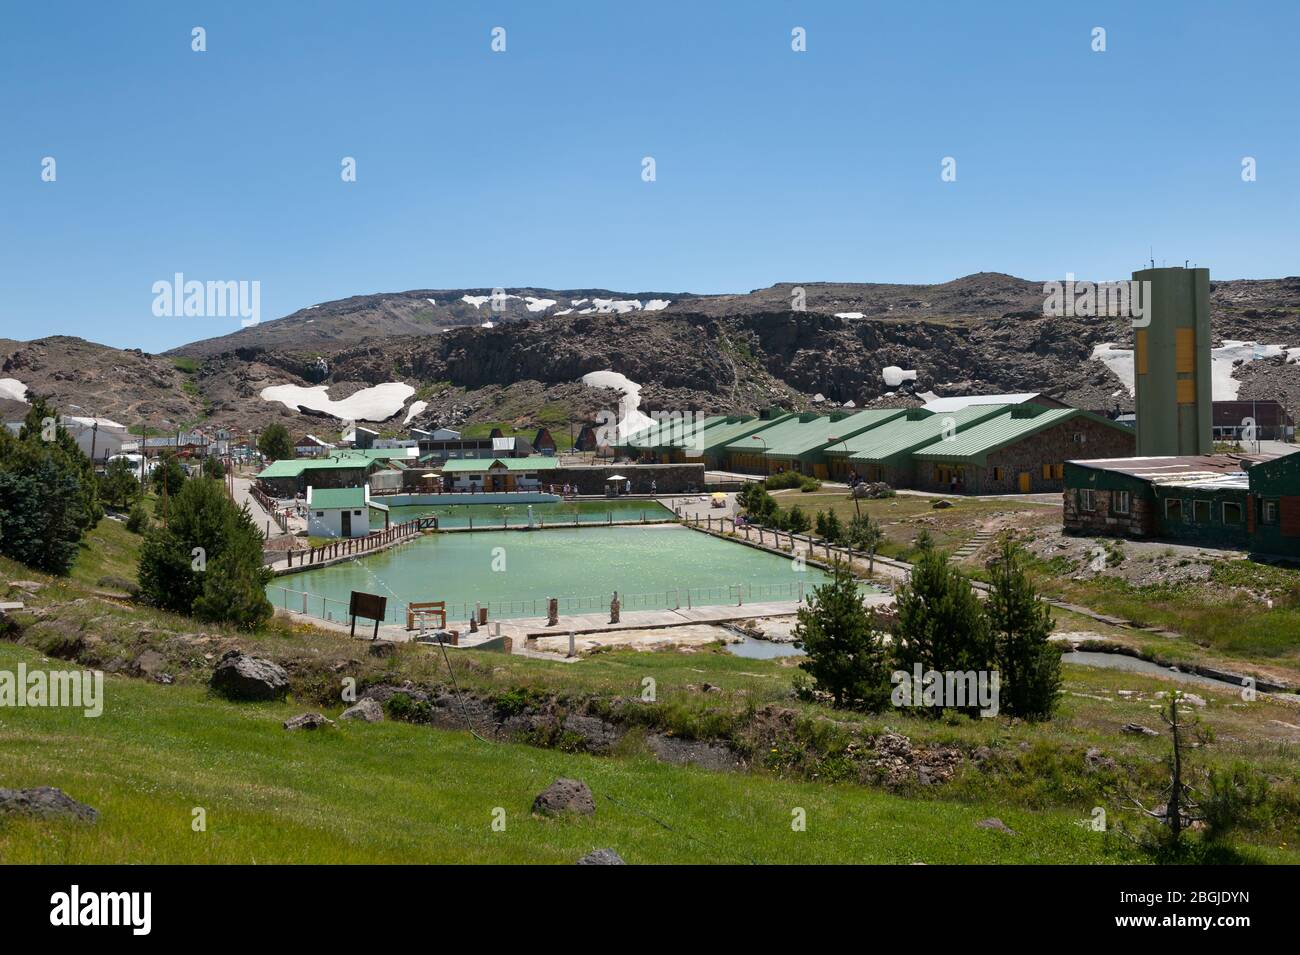 Copahue, Argentina - March 03 2020: View of the thermal complex with hot springs in Copahue, province of Neuquen Stock Photo